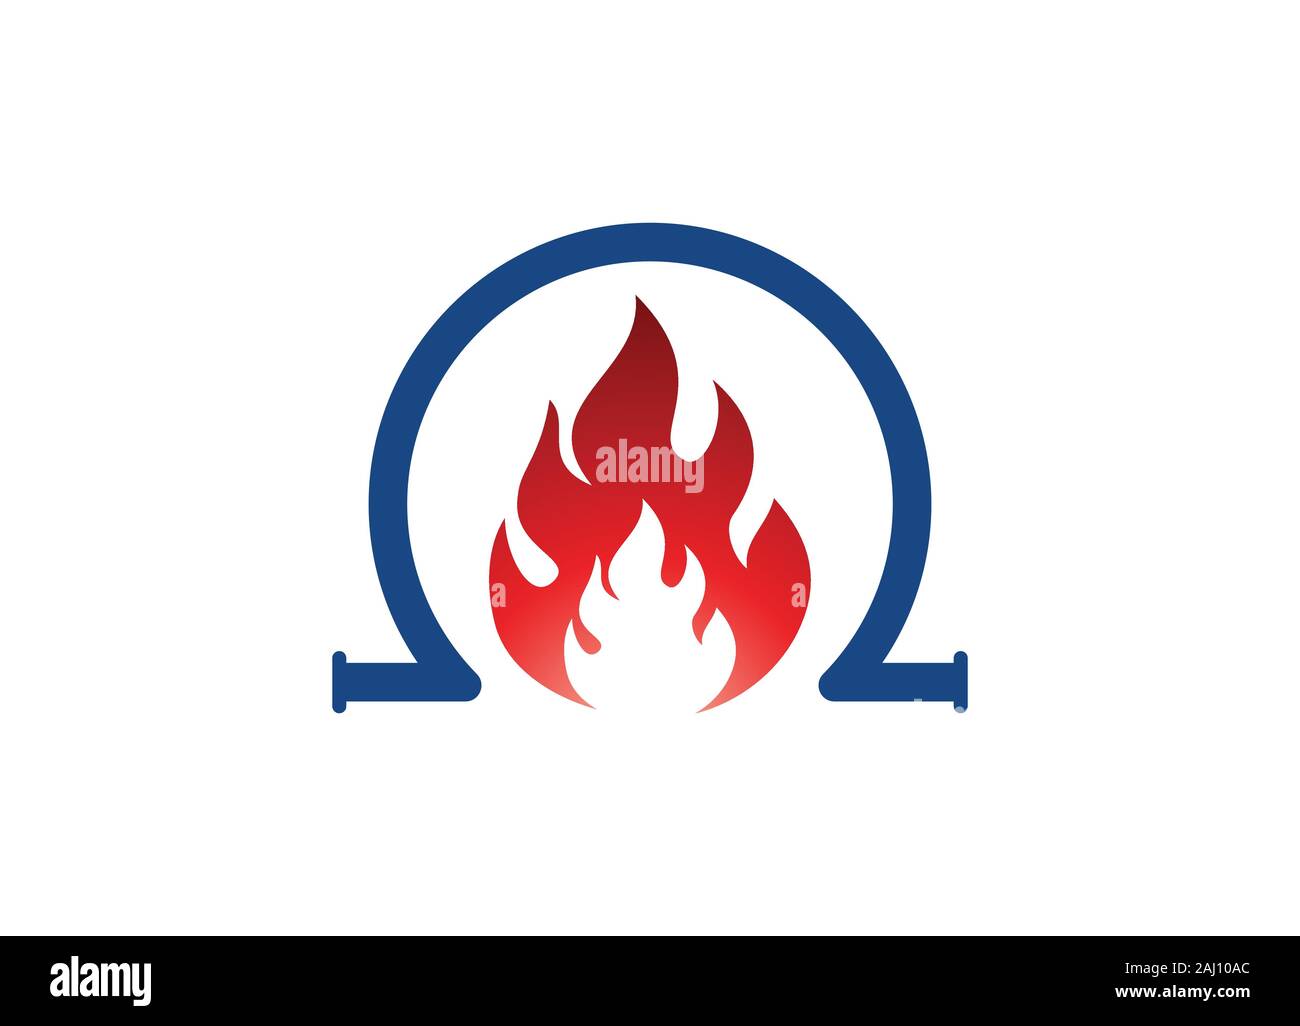 Fire flame icon in the shape of a drop. Oil and gas industry logo design concept. Stock Vector